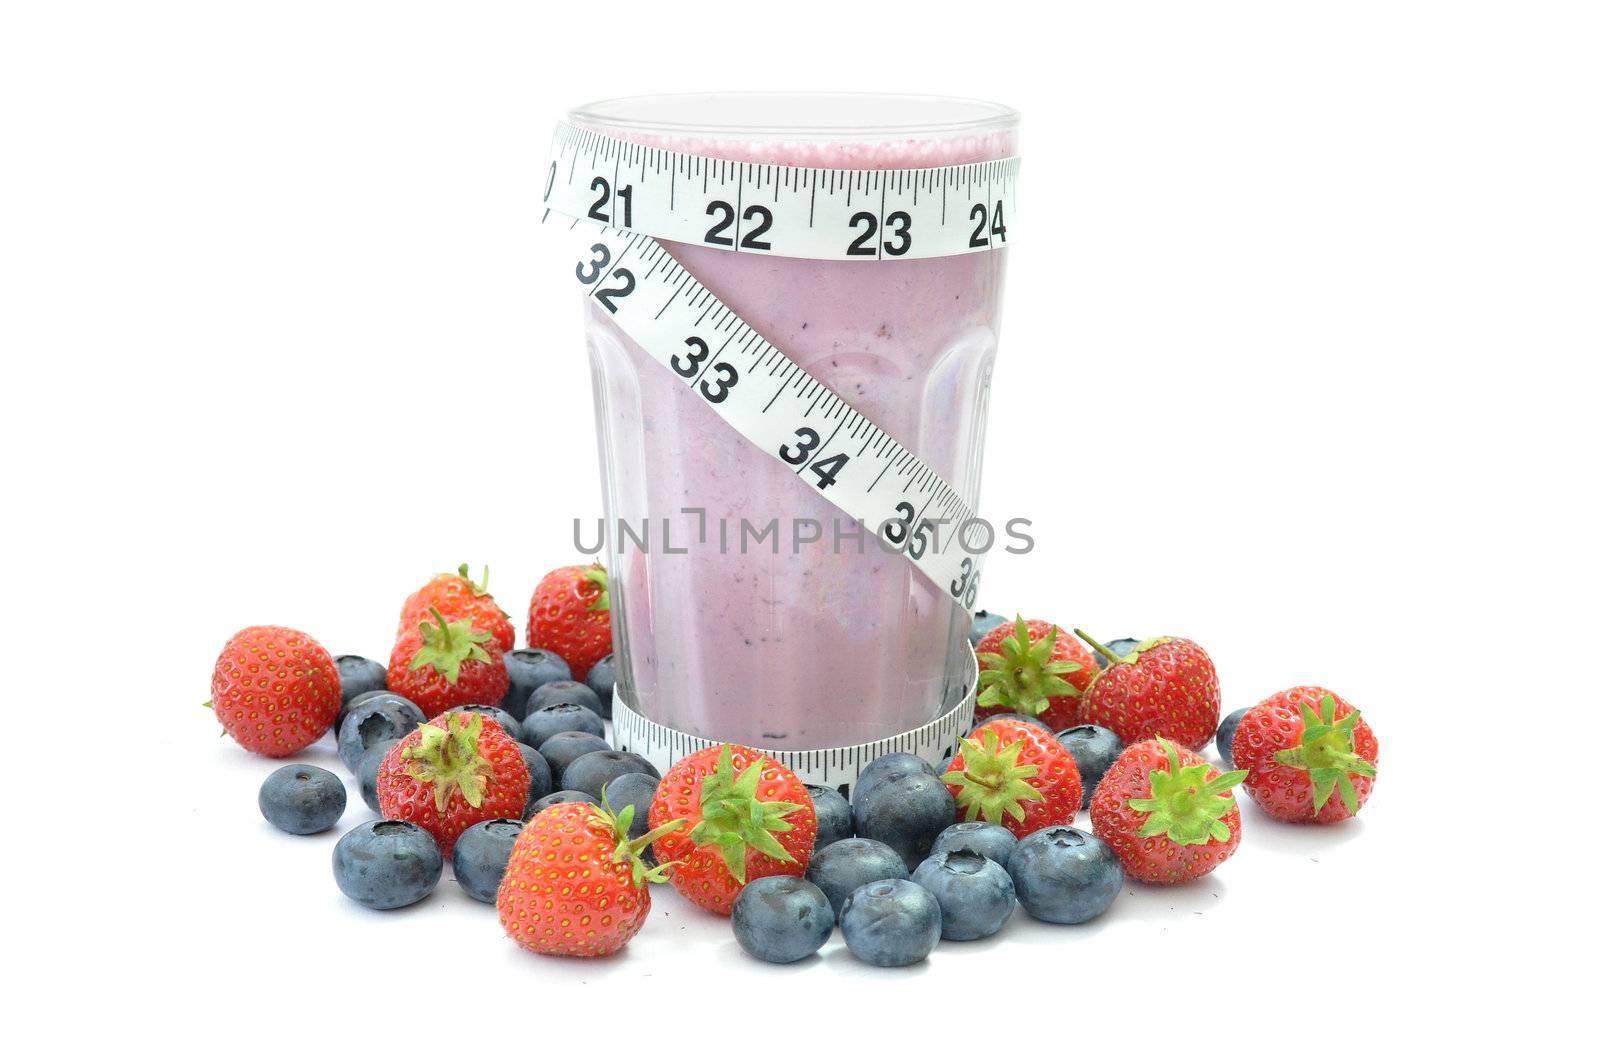 Blueberry flavoured smoothie wrapped with a measuring tape